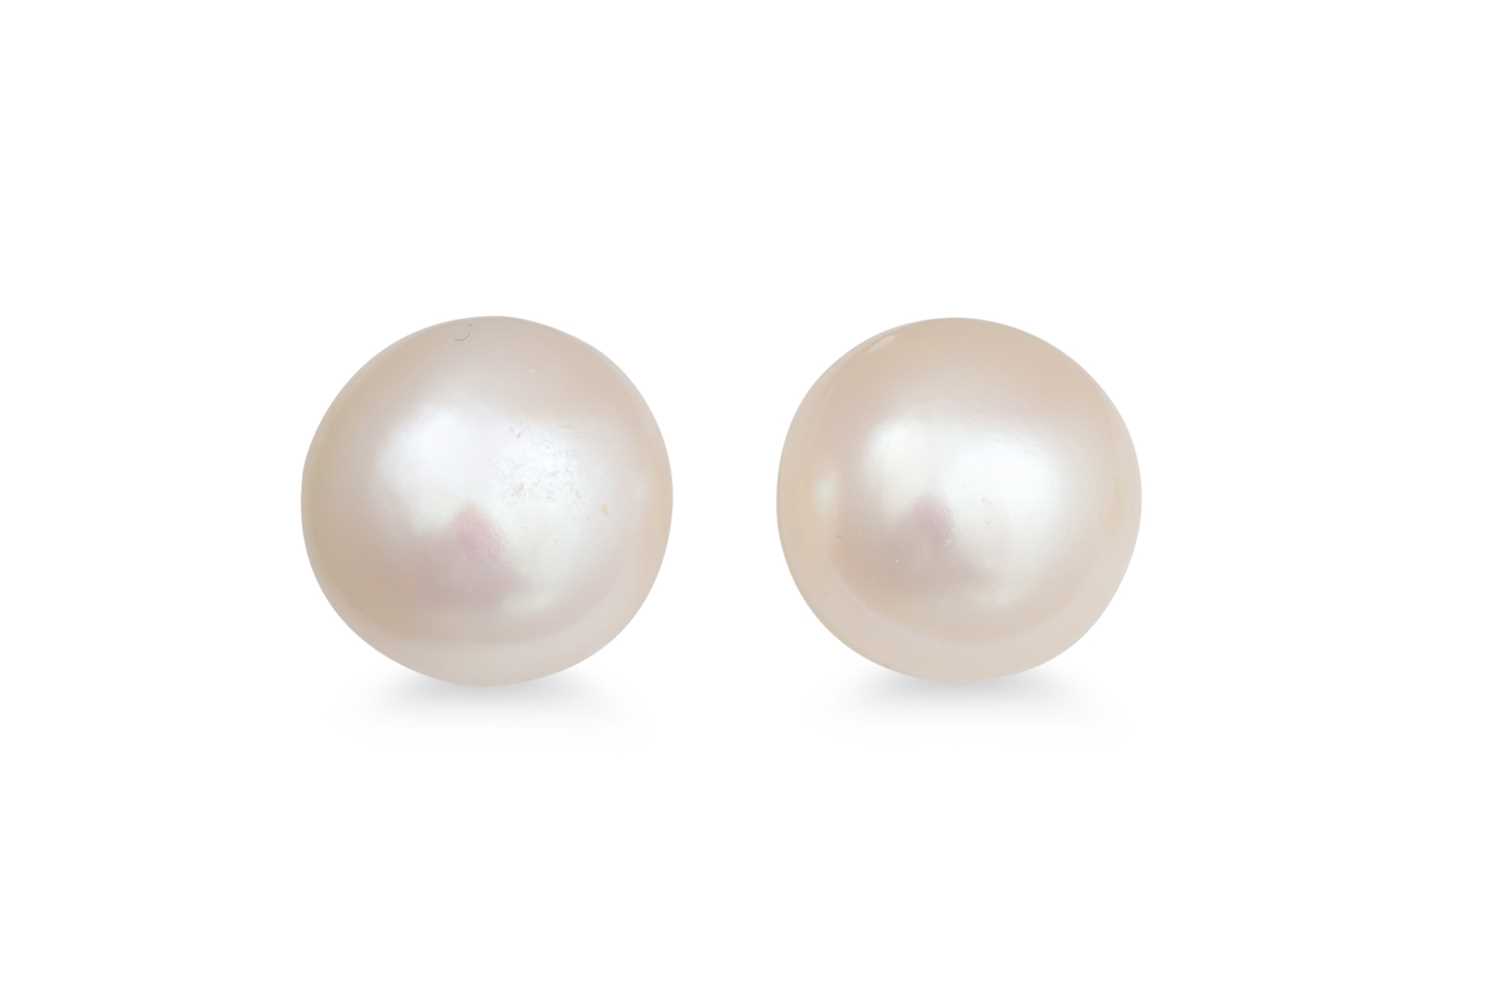 Lot 76 - A PAIR OF BUTTON PEARL EARRINGS, mounted in gold